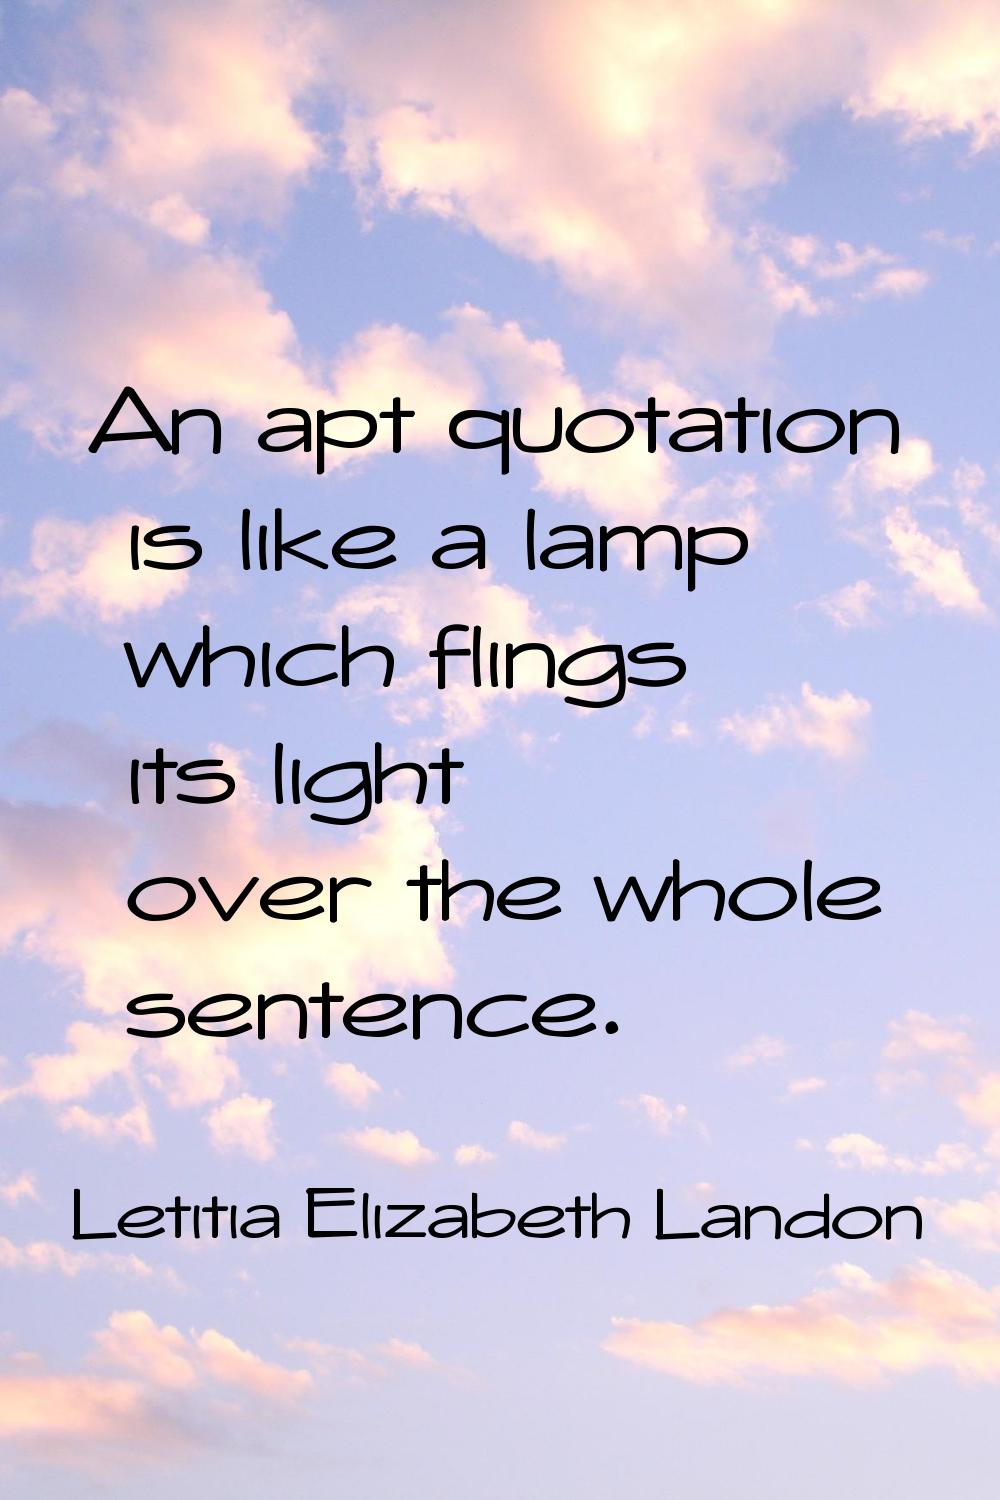 An apt quotation is like a lamp which flings its light over the whole sentence.